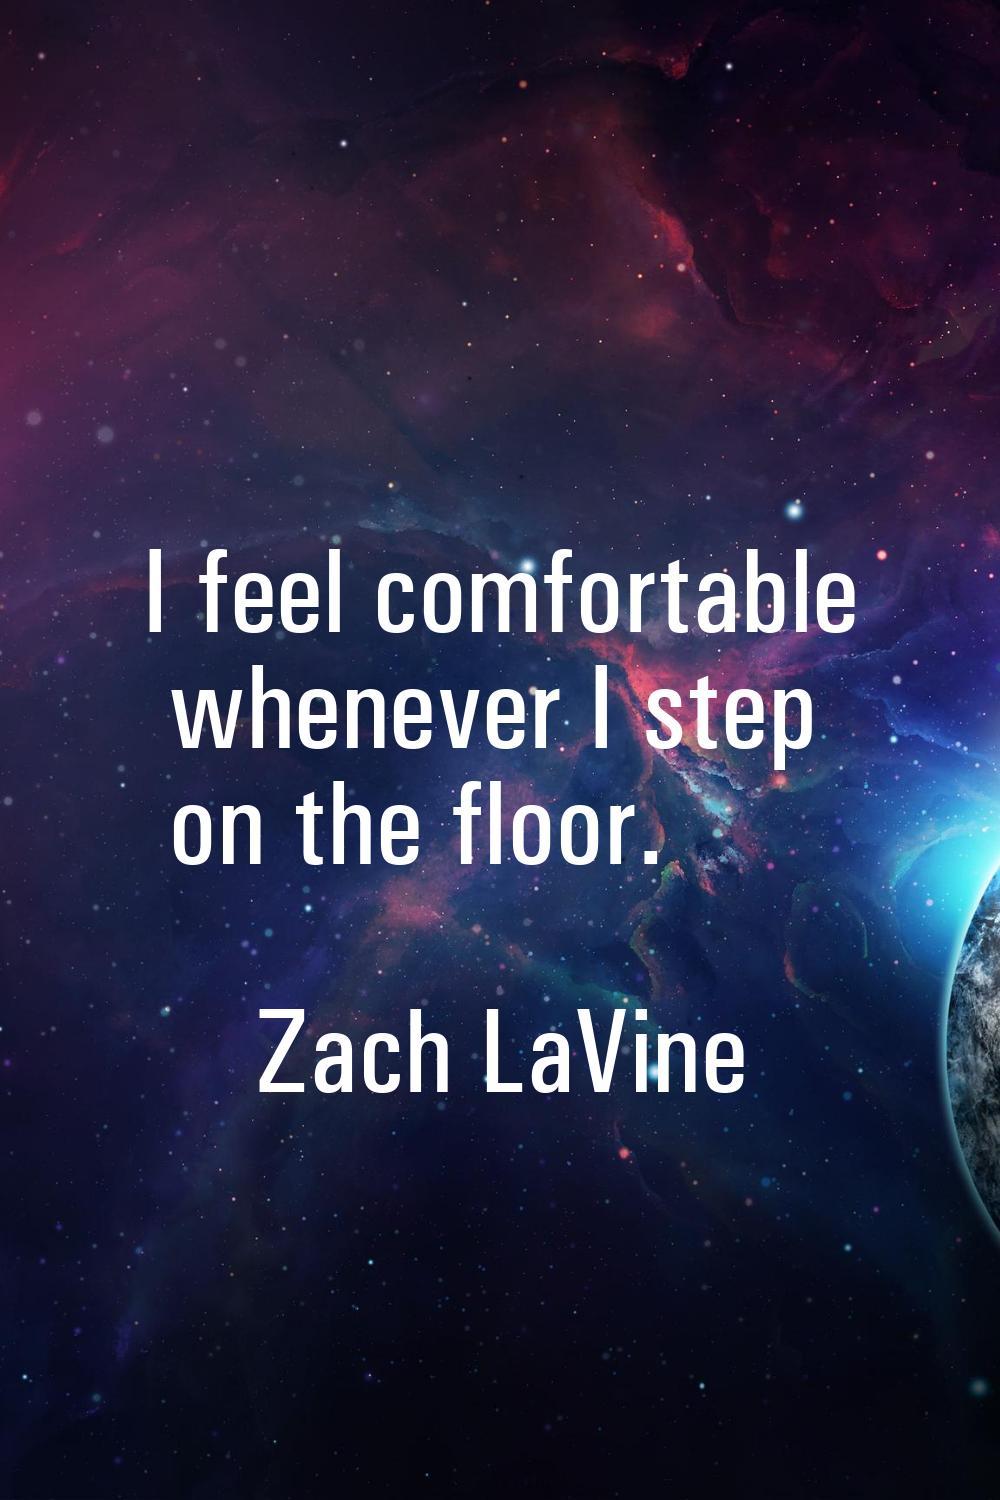 I feel comfortable whenever I step on the floor.